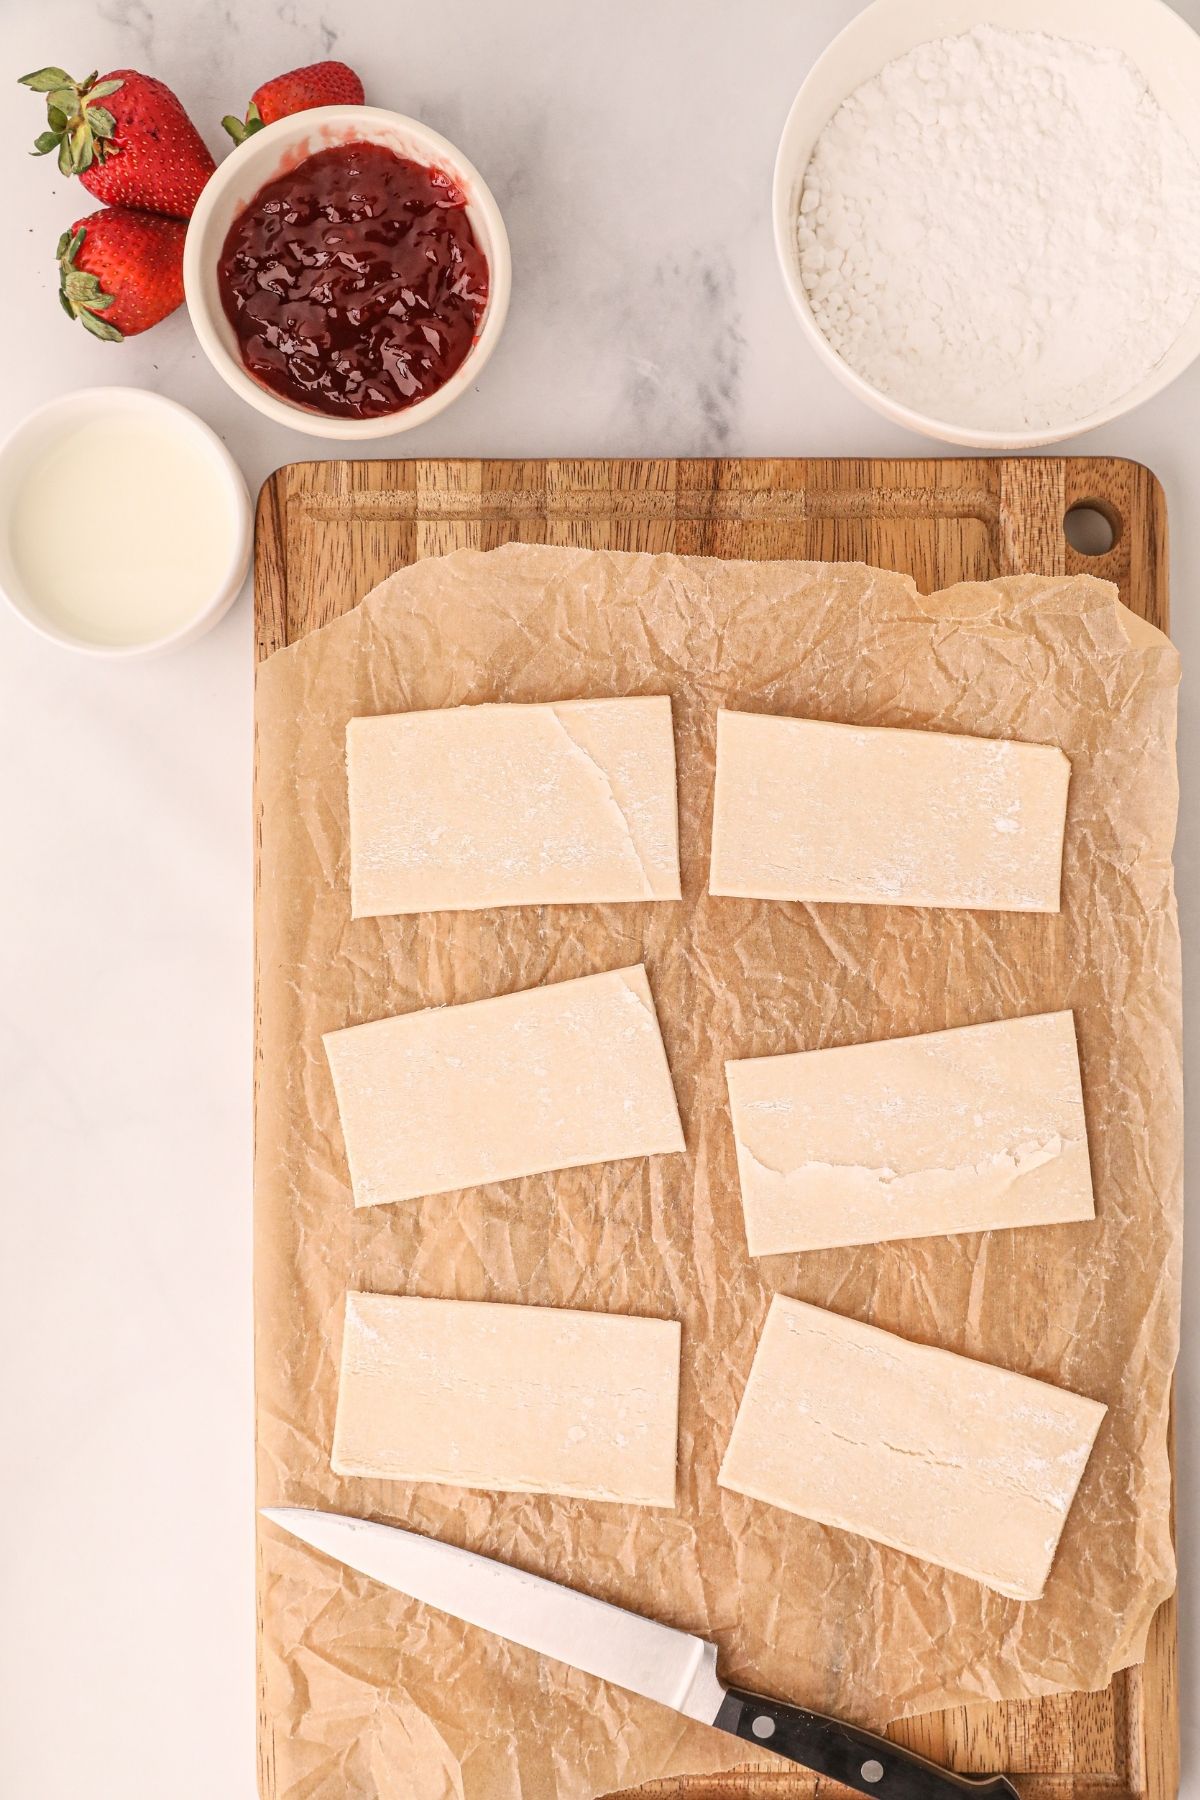 Pastry cut into rectangles before being filled with jam